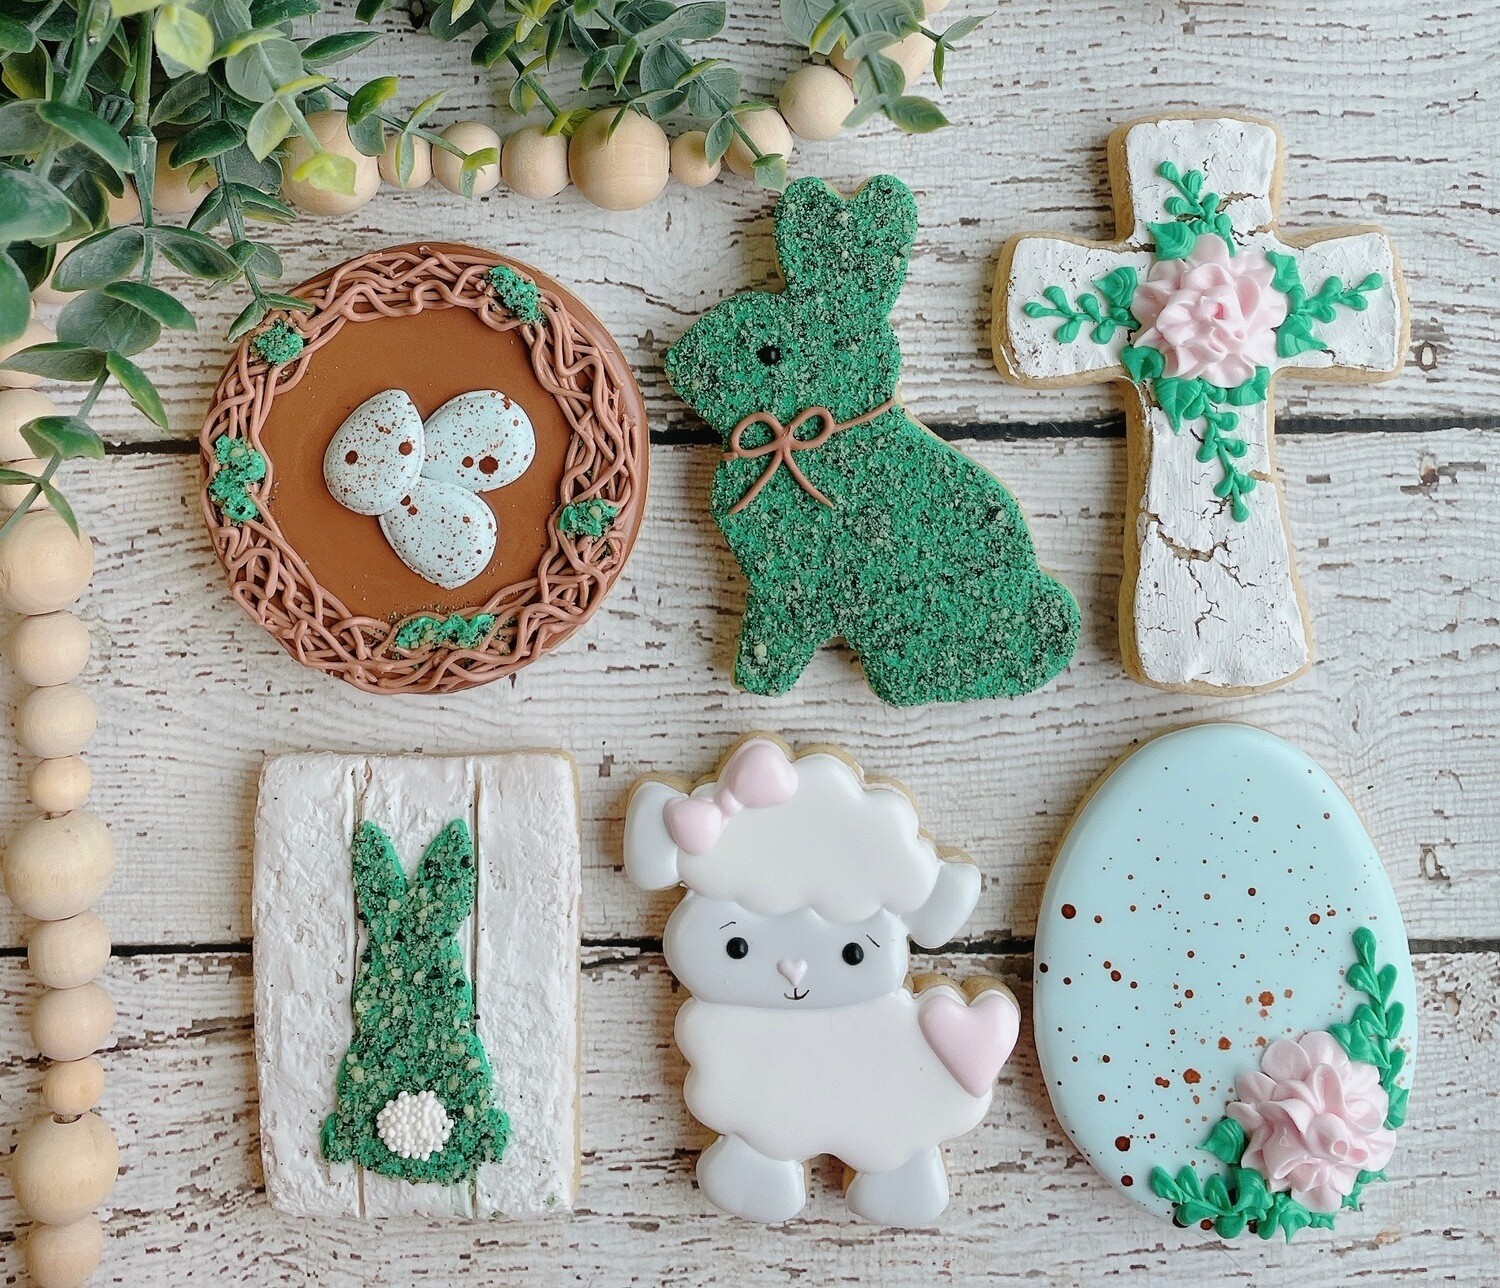 COOKIE DECORATING CLASS
MARCH 13, 2023 (In store, 7-9pm)